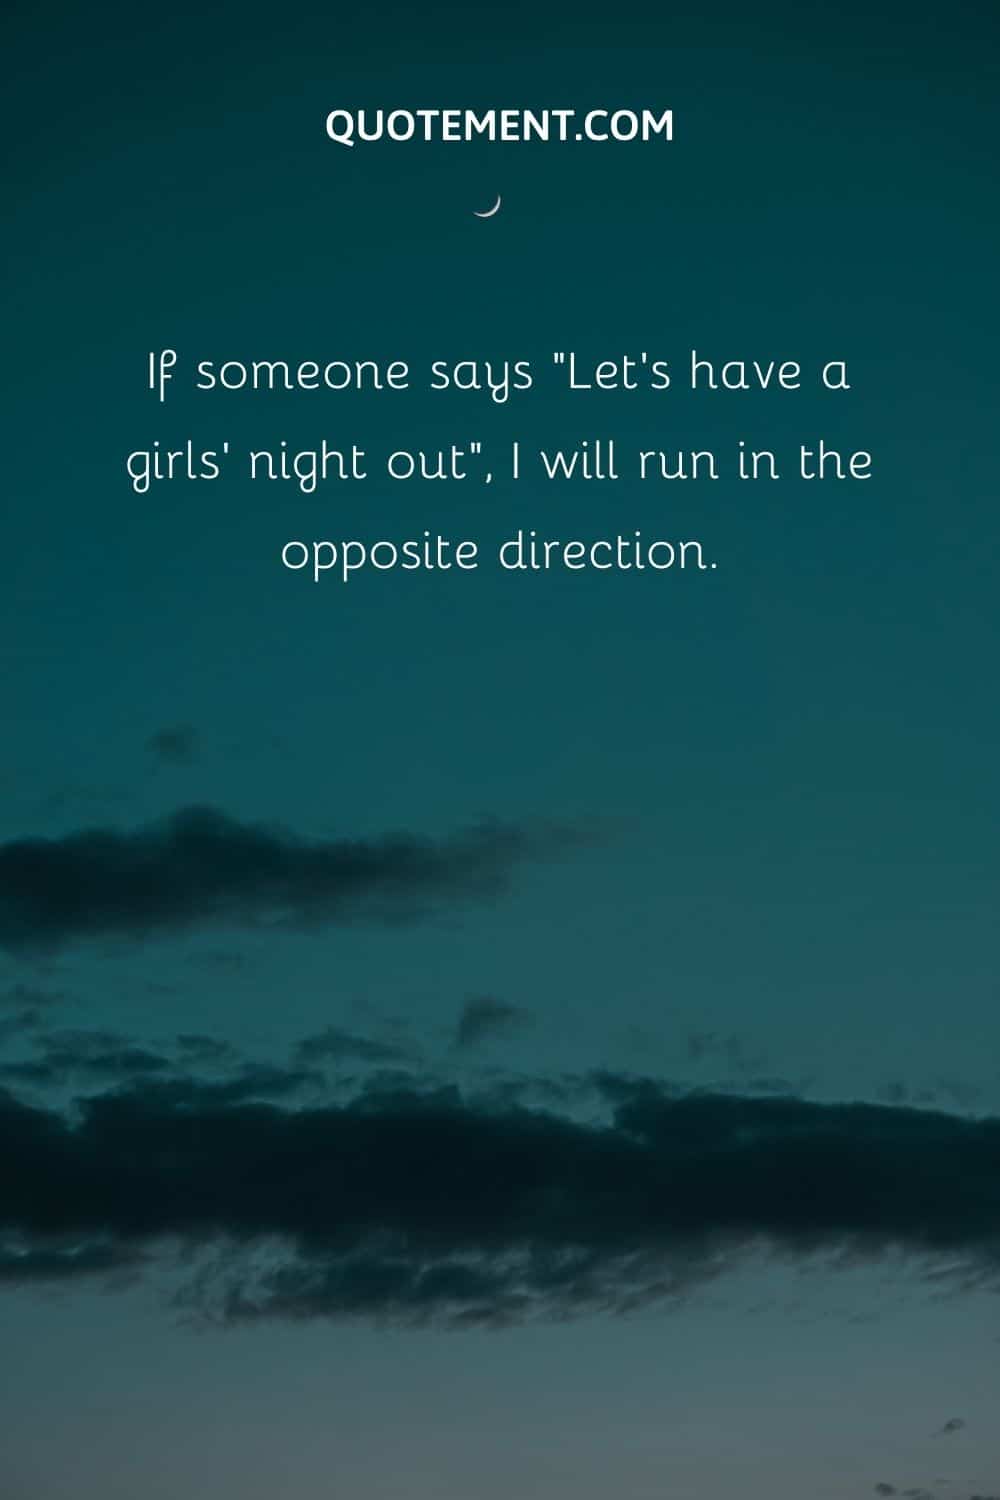 If someone says “Let’s have a girls’ night out”, I will run in the opposite direction